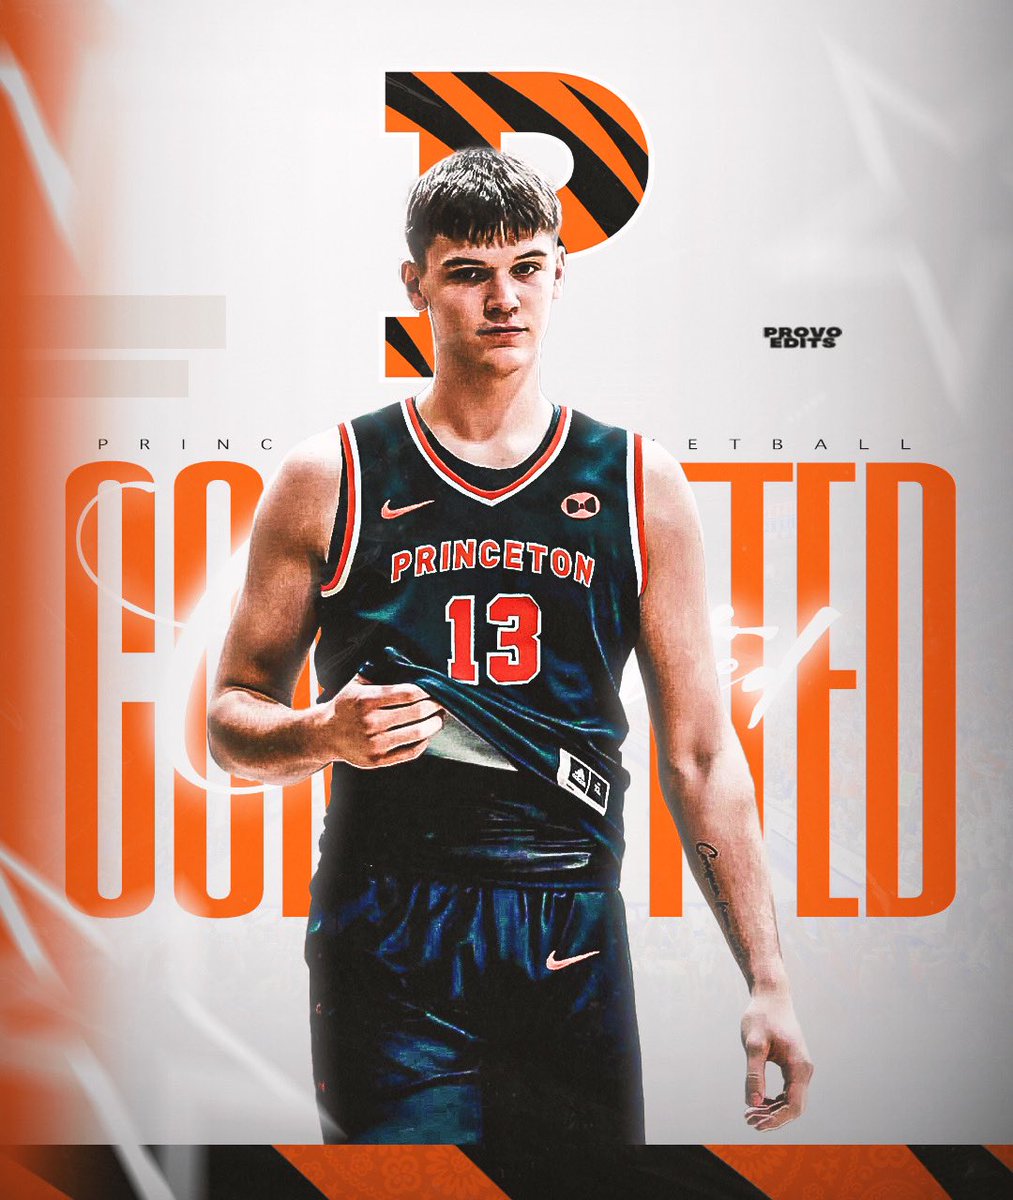 Extremely excited to announce my commitment to the admissions process at Princeton University! Thank you to Coach Henderson, Coach MacConnell and the rest of the Princeton staff for this amazing opportunity! #GoTigers #ForGarrett